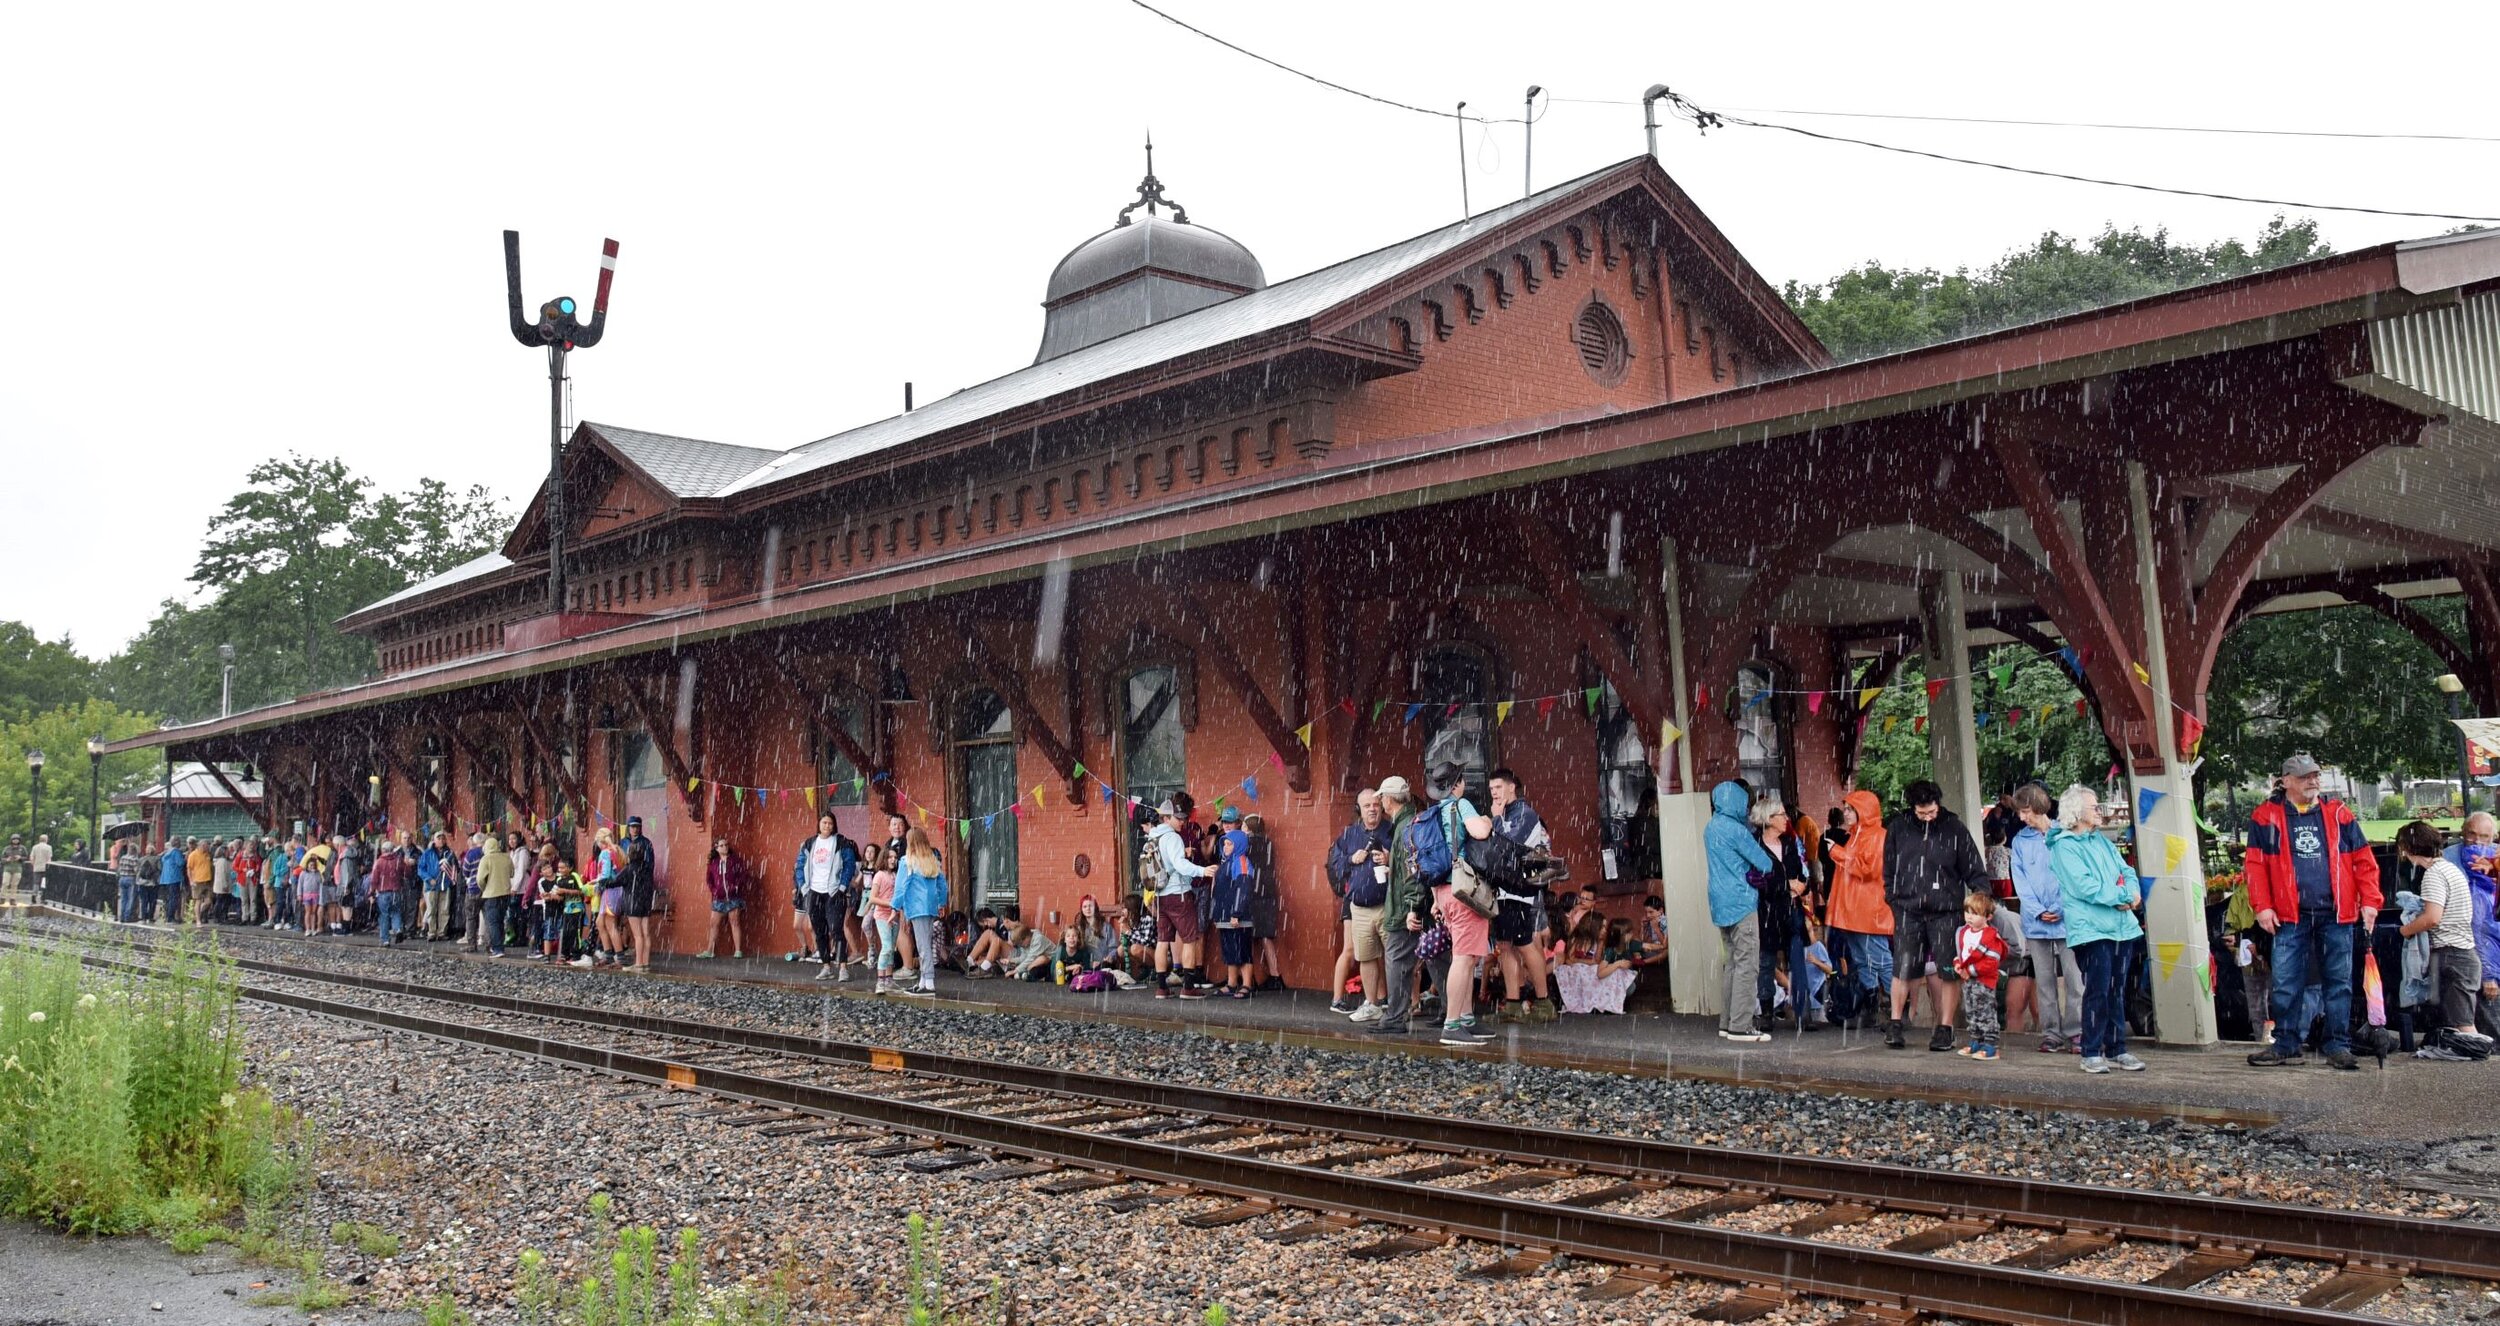   The crowd awaiting Amtrak in Waterbury takes shelter under the train station's eaves and on its covered deck Monday morning. Photo by Gordon Miller  